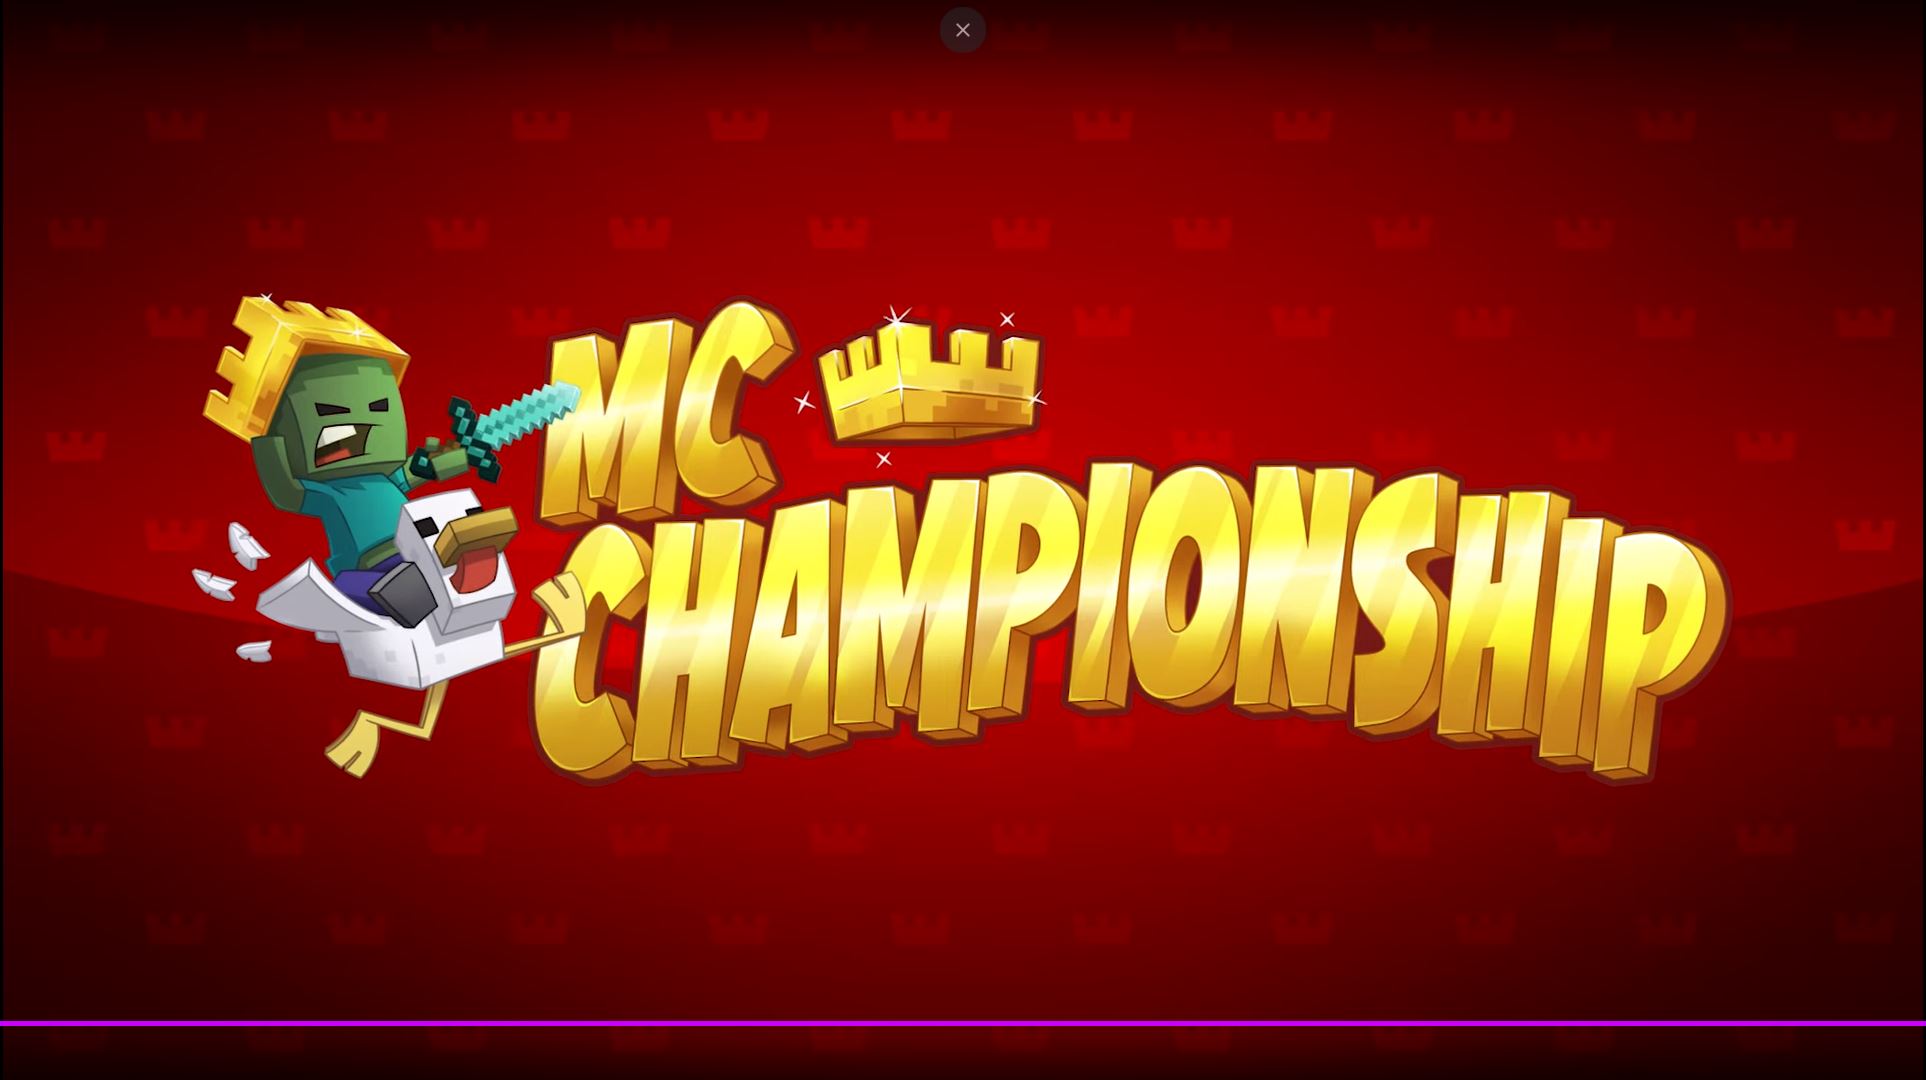 Minecraft MC Championship 8 Finished At August 15th, When Will The Next MC Championship Take Place?